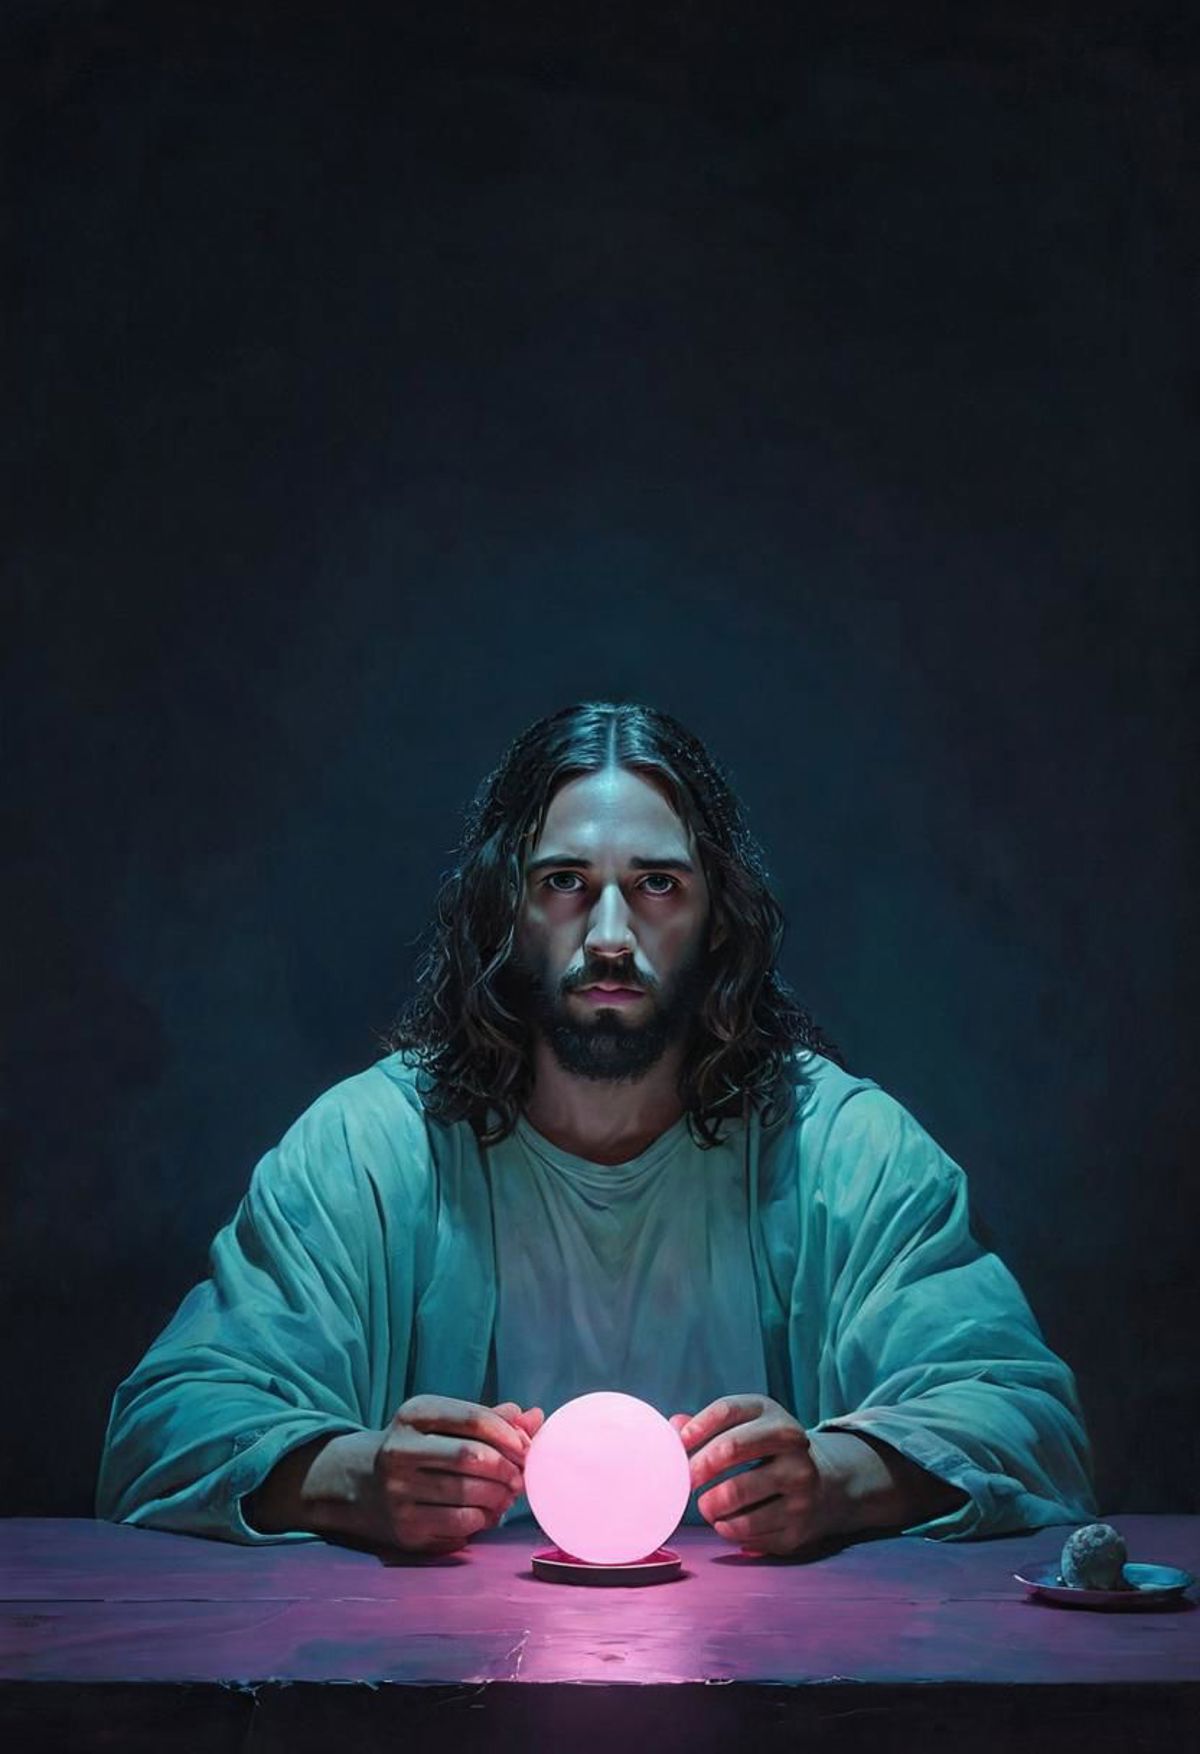 Jesus Christ holding a pink ball in a dark room.